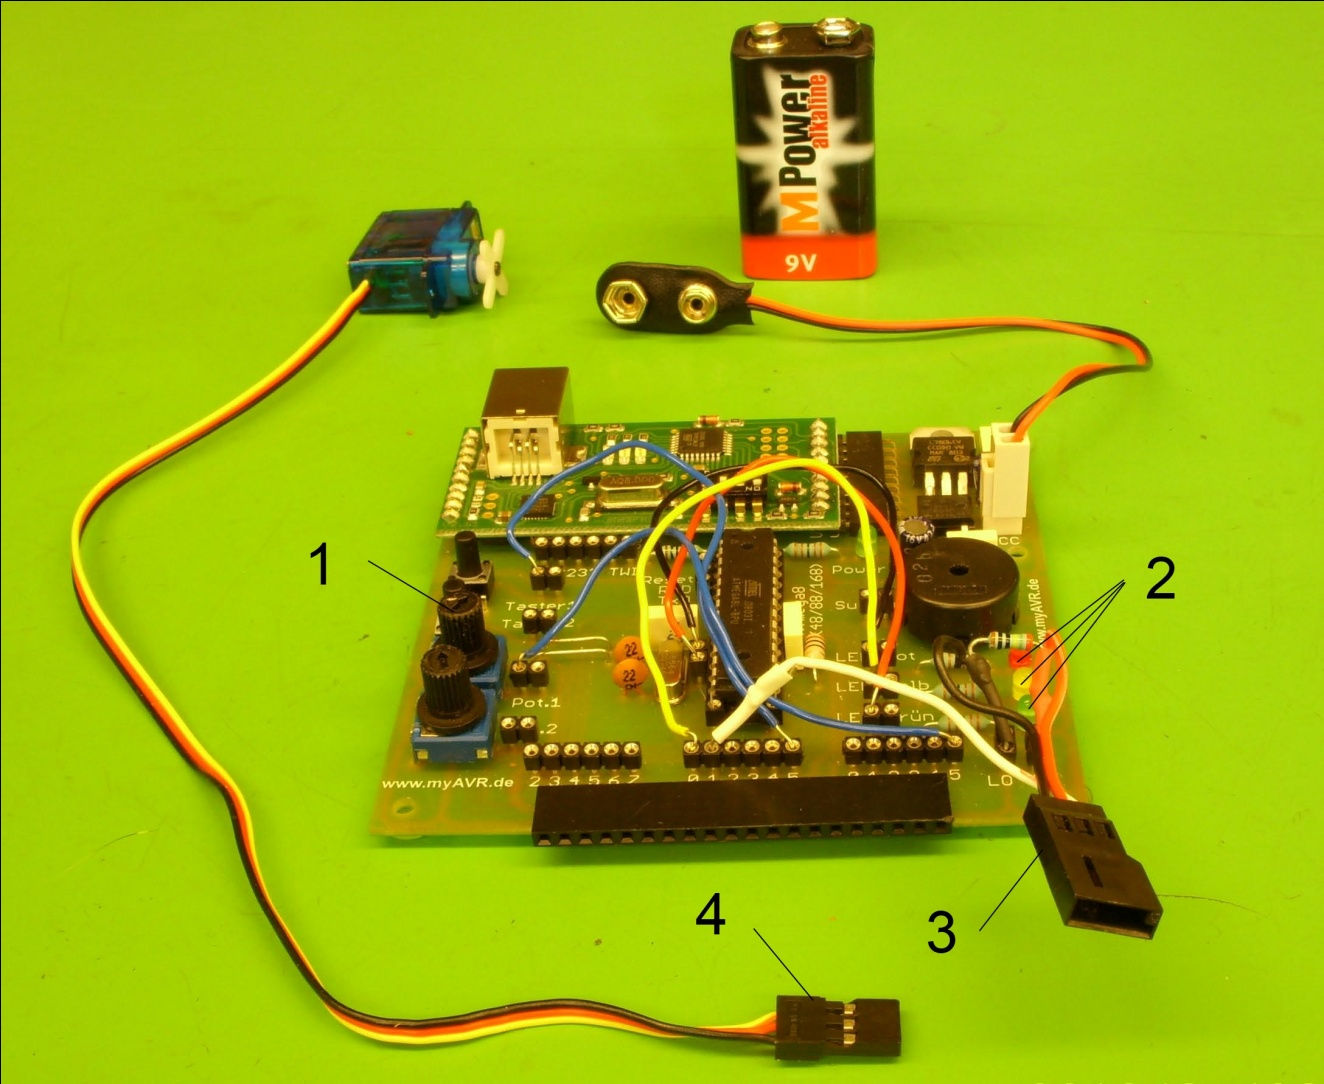 . PWM Signal Generators for servos and brushless X-UFO with modified ESC UFO Doctor, June th, 00.